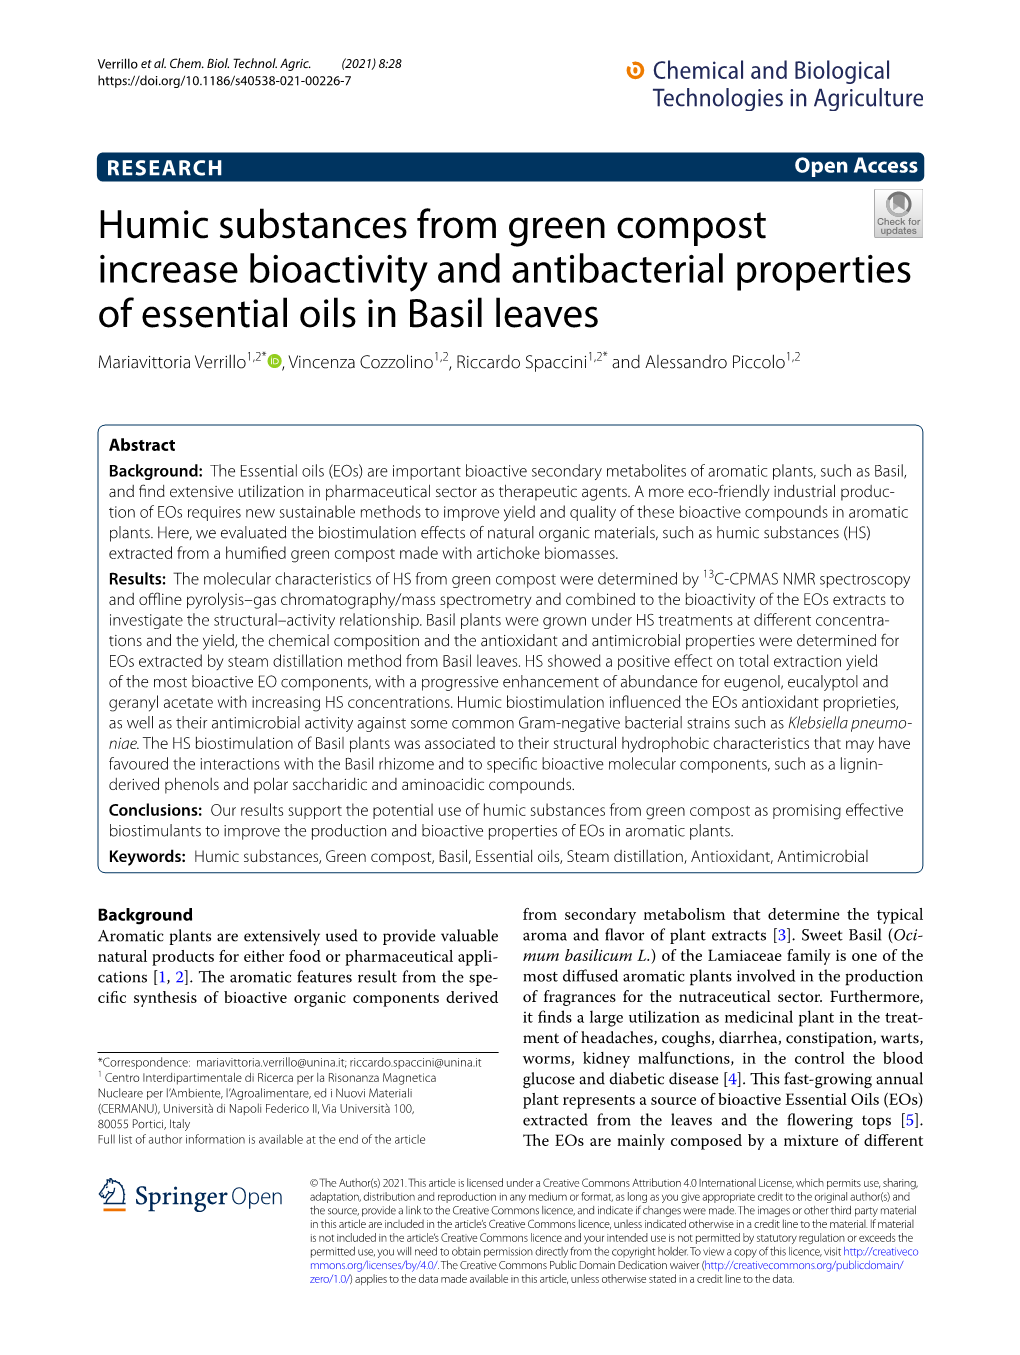 Humic Substances from Green Compost Increase Bioactivity And